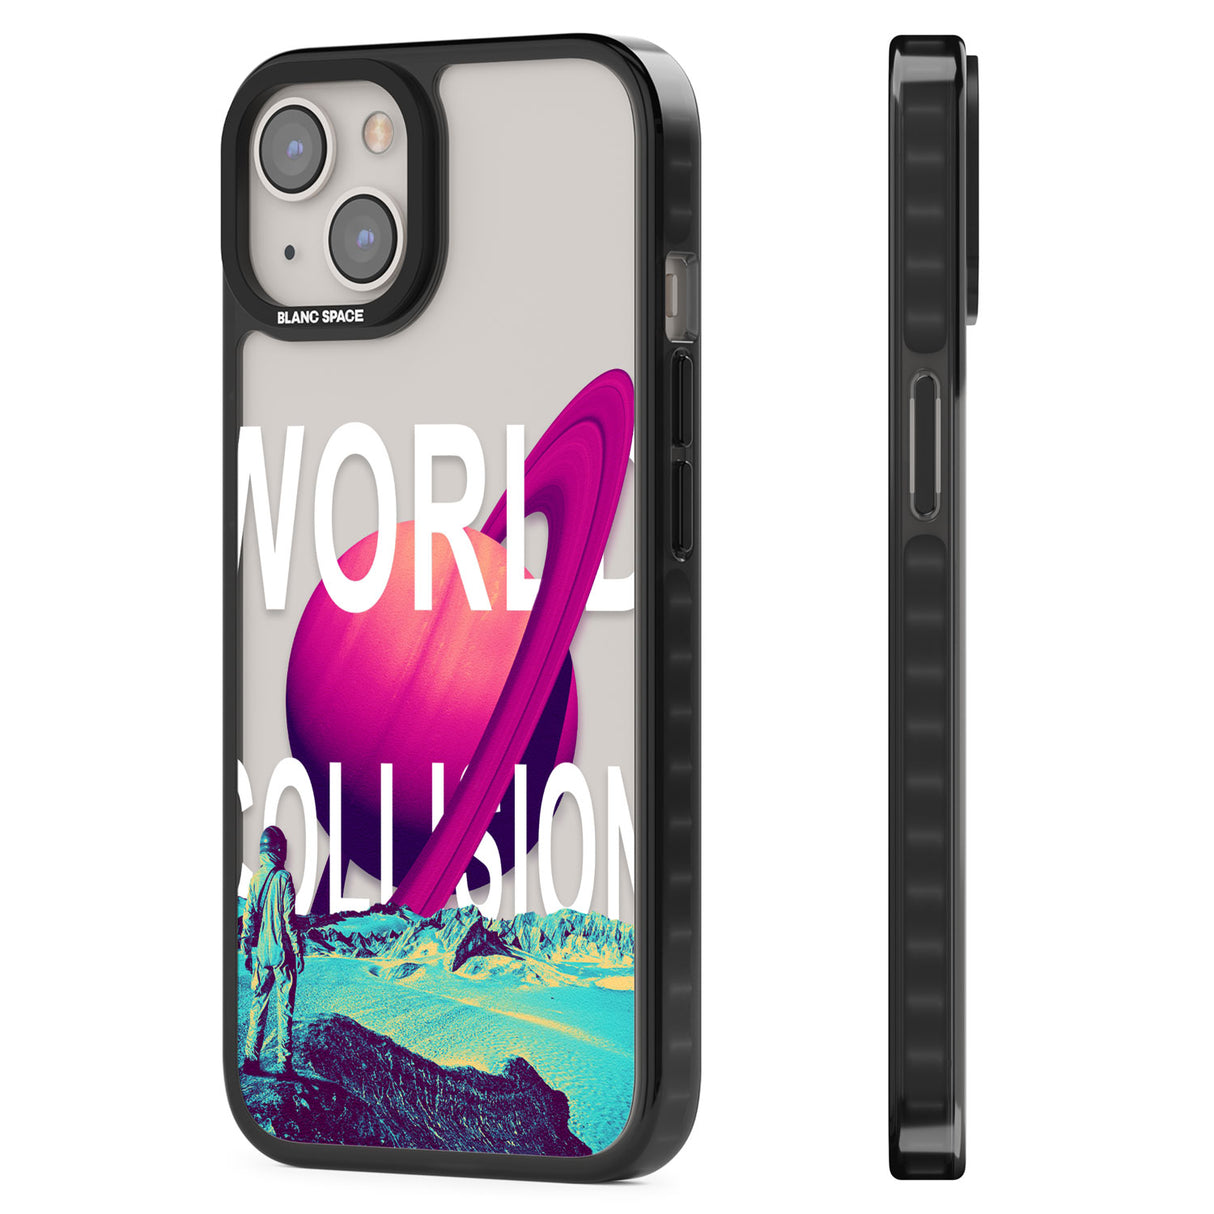 World Collision Black Impact Phone Case for iPhone 13, iPhone 14, iPhone 15